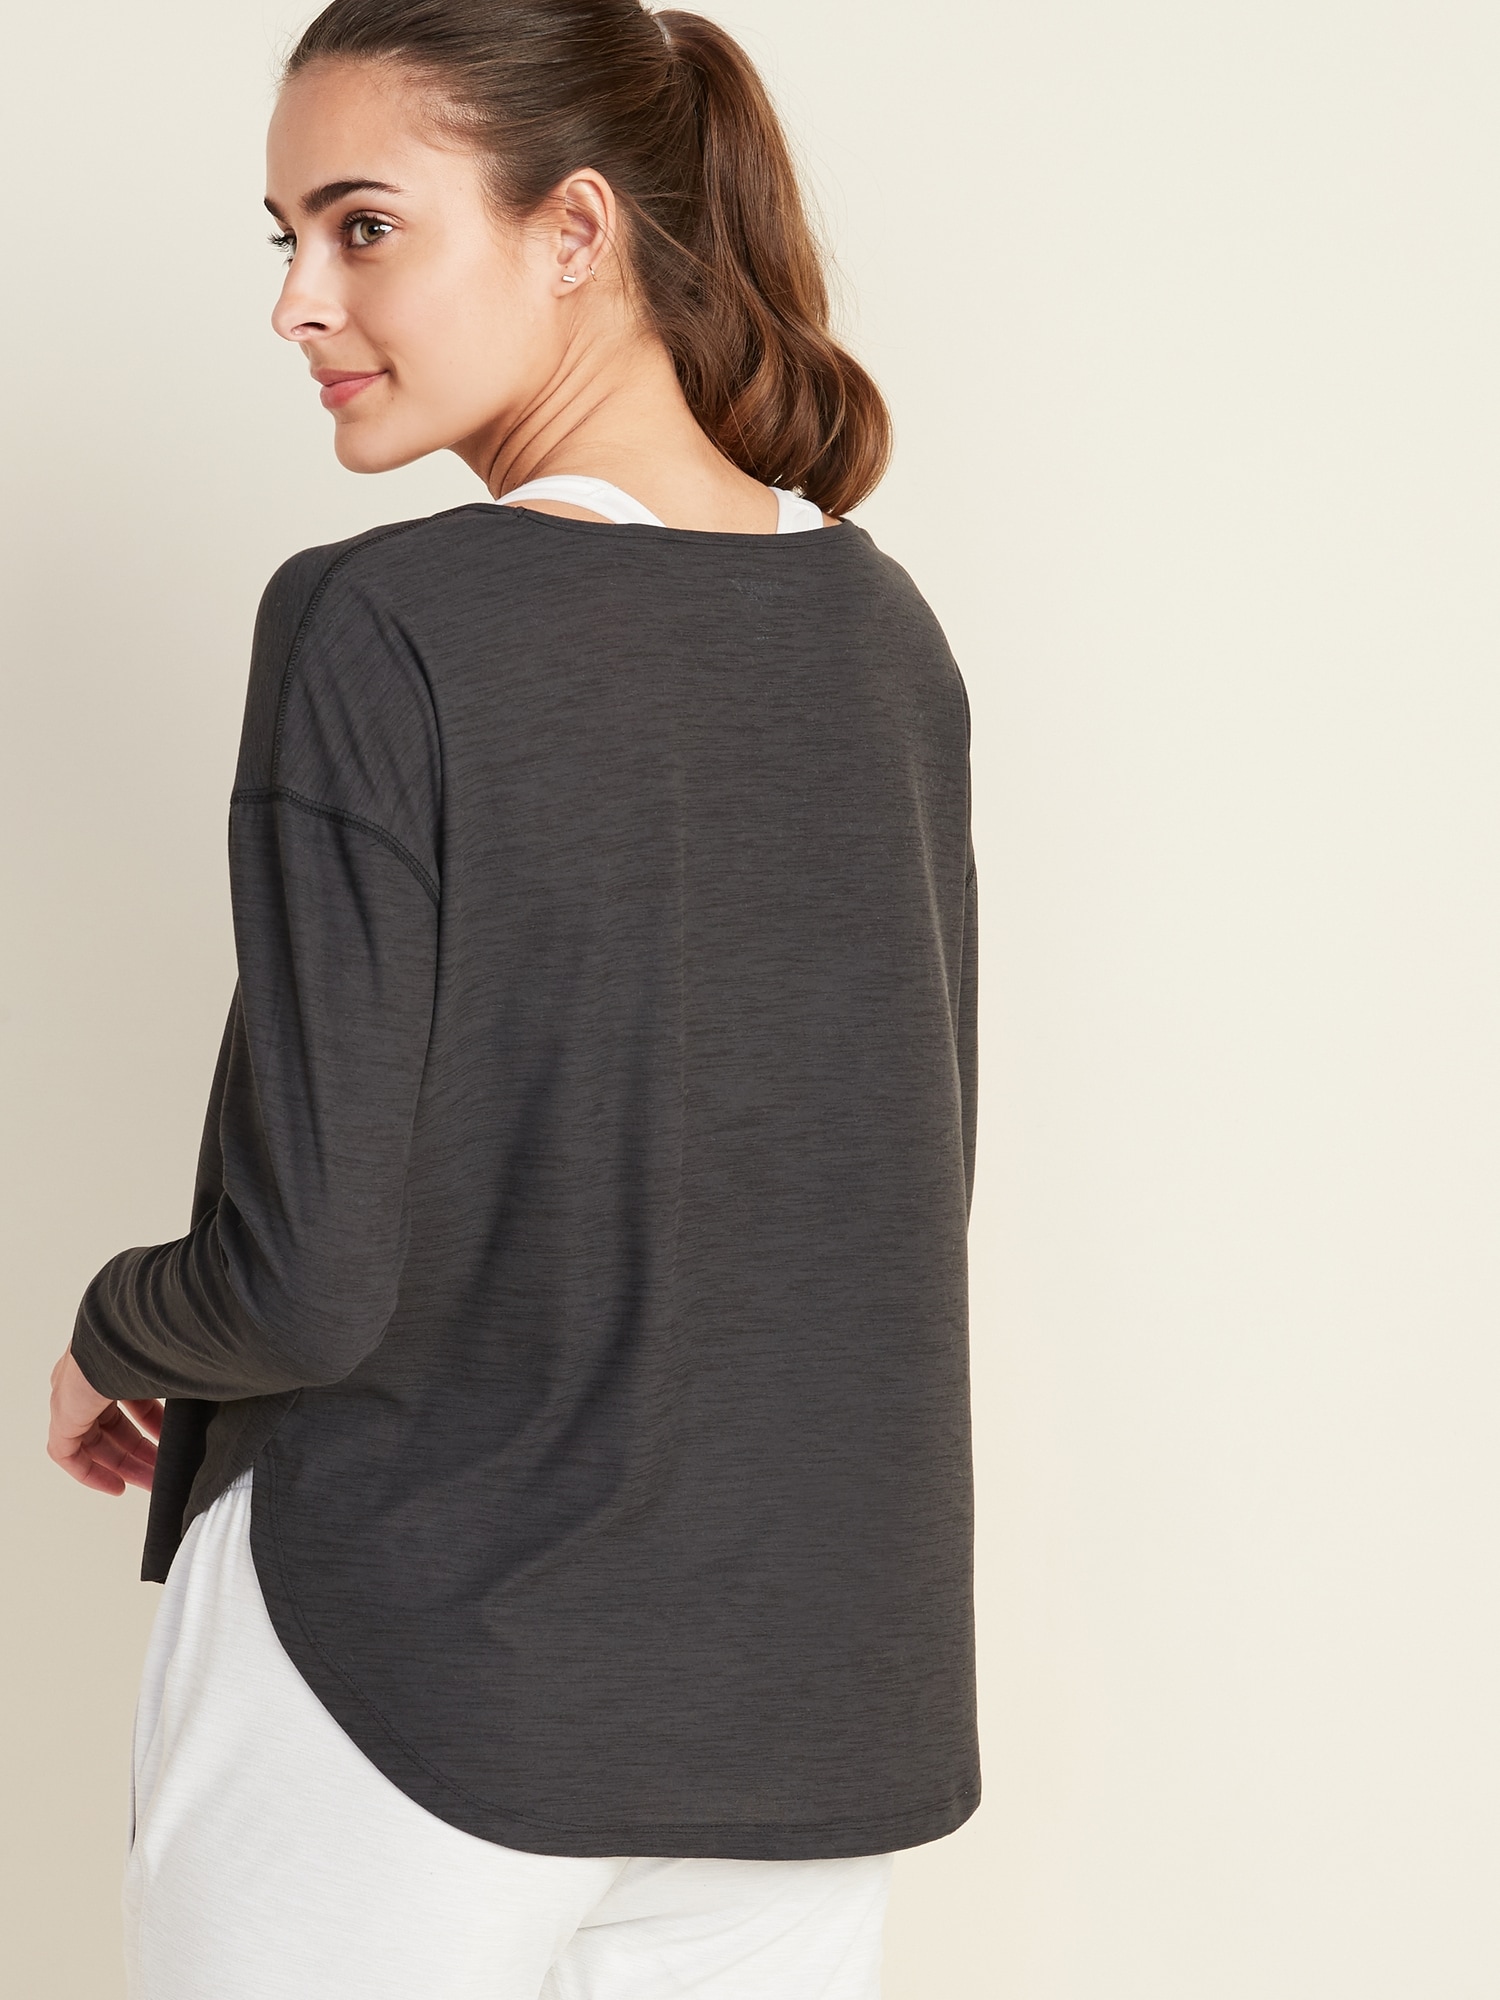 Breathe ON Long-Sleeve Performance Top for Women | Old Navy